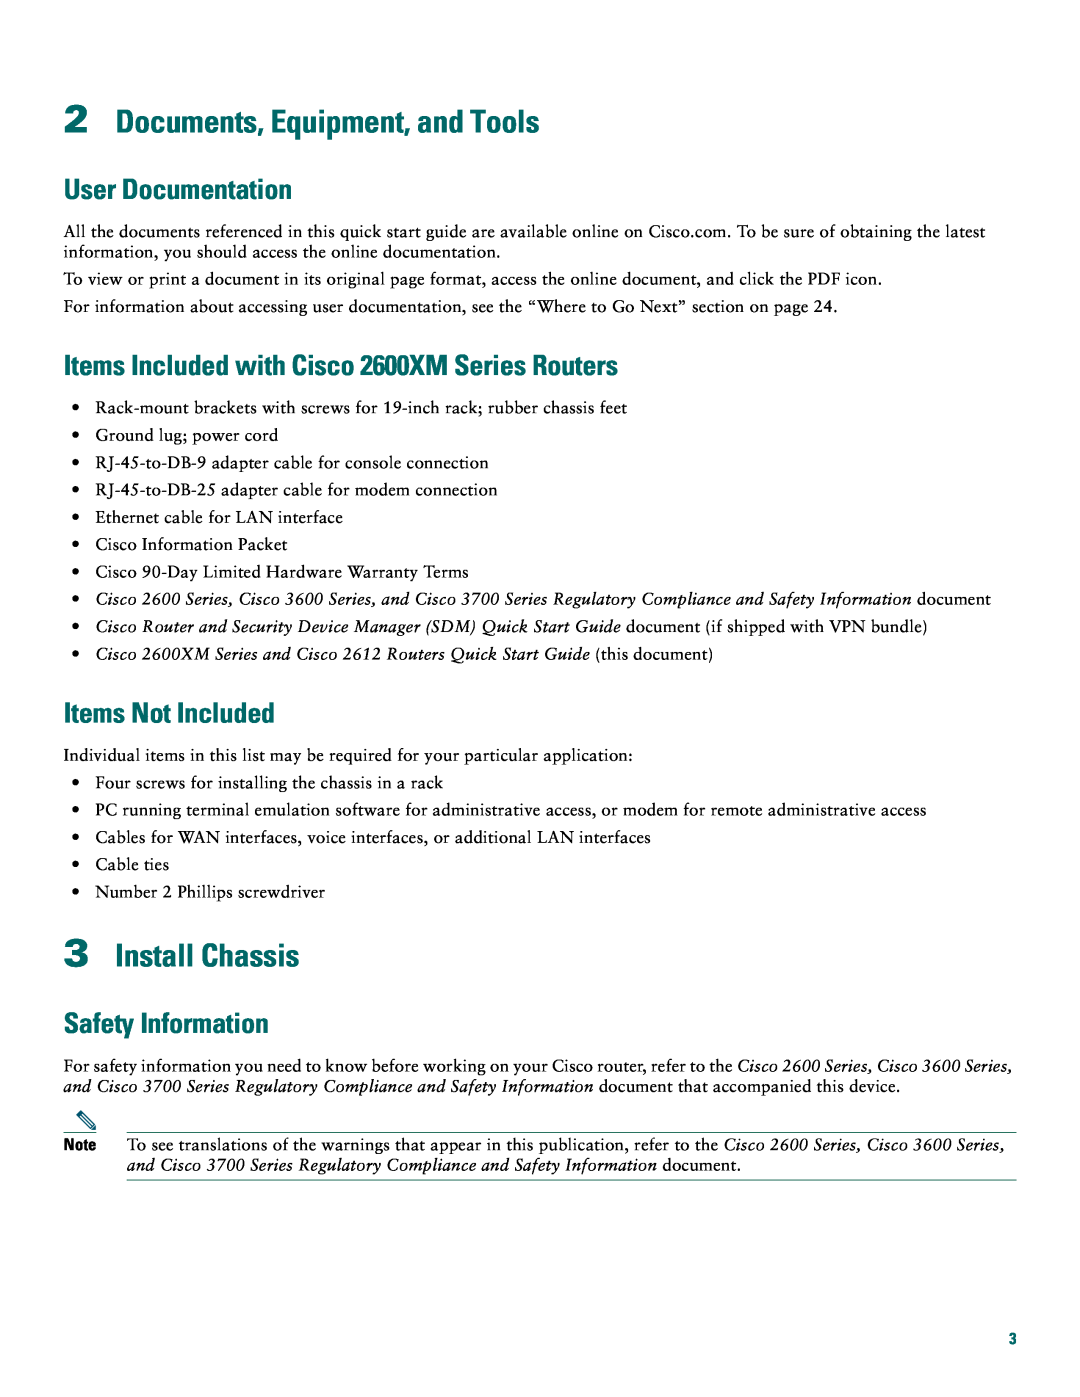 Cisco Systems 2612, 2600XM Documents, Equipment, and Tools, Install Chassis, User Documentation, Items Not Included 